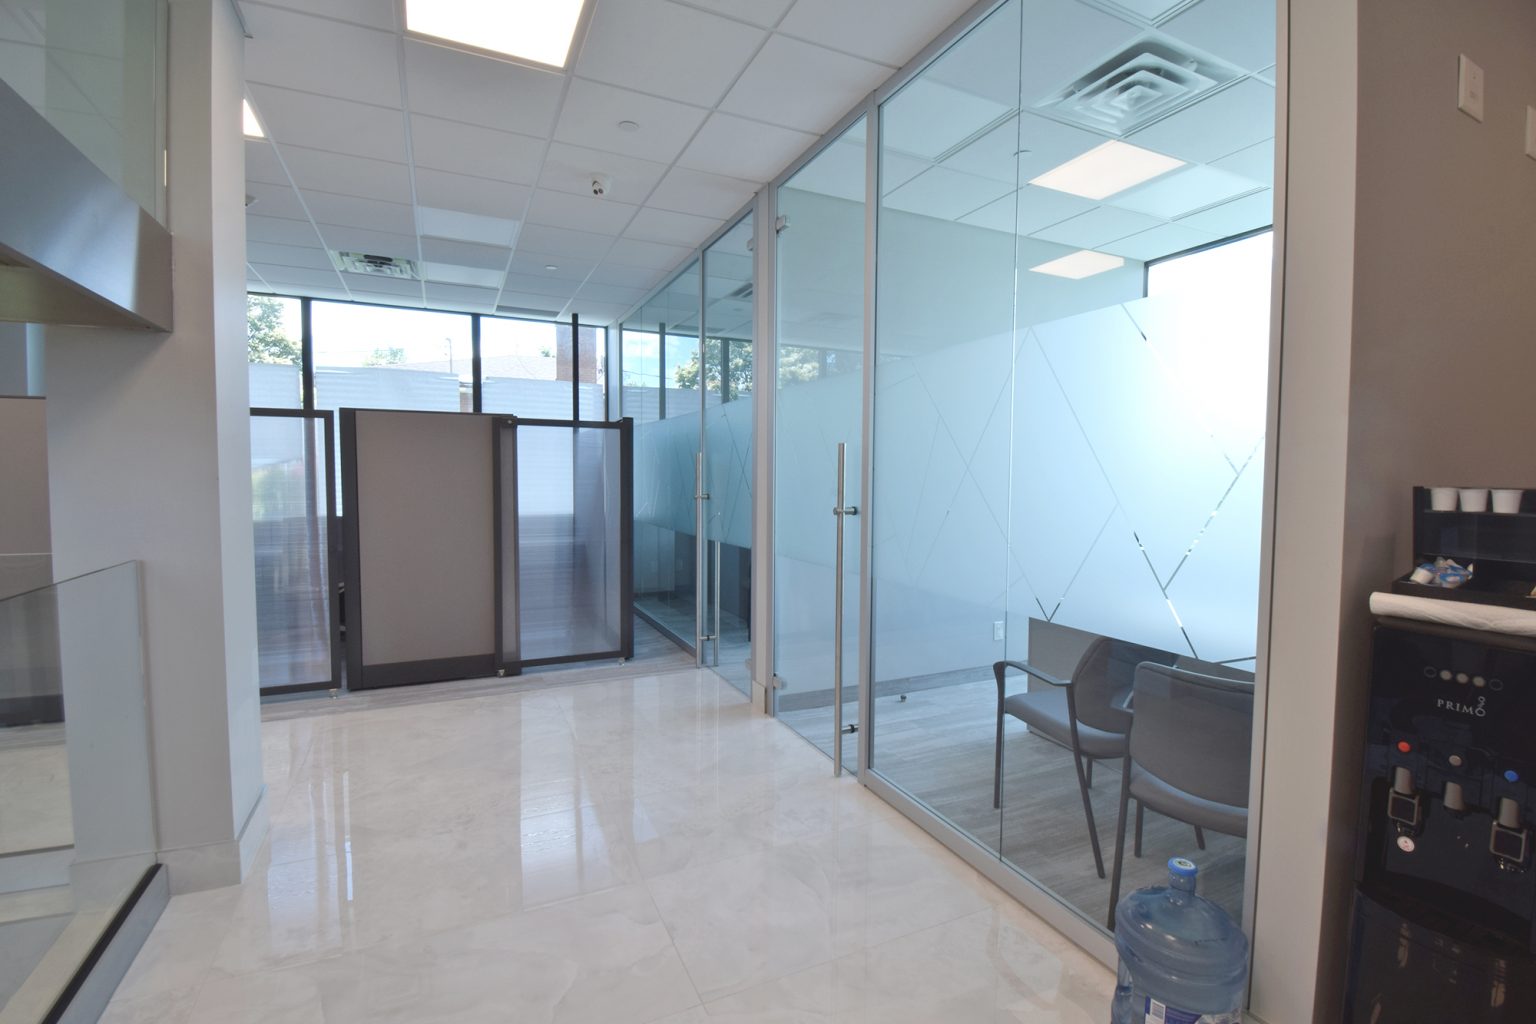 Arzani Head Office - New Commercial Glass Partitions